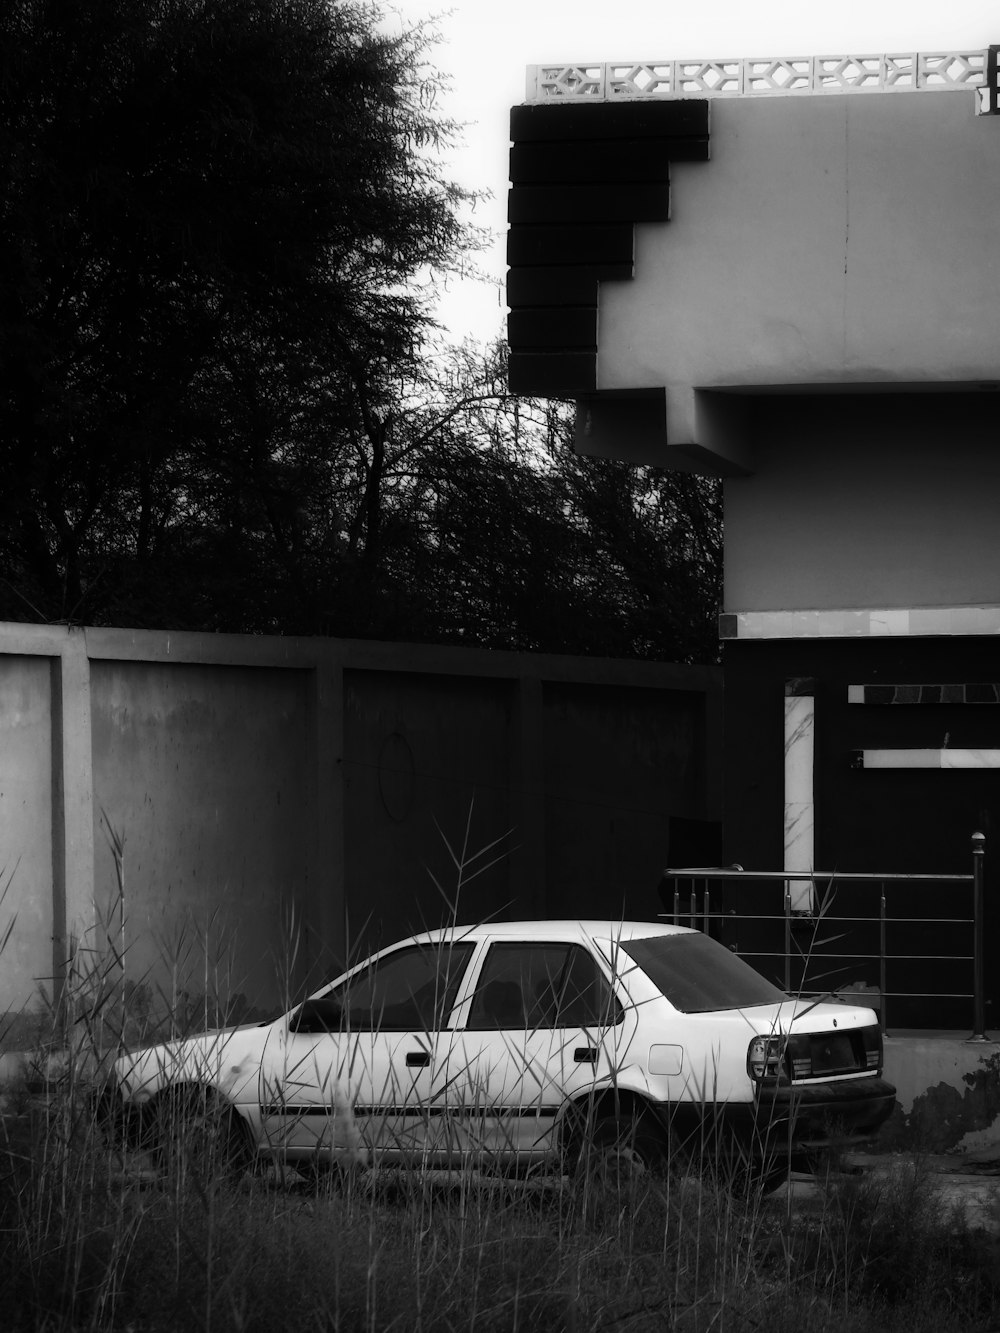 a white car parked in front of a building